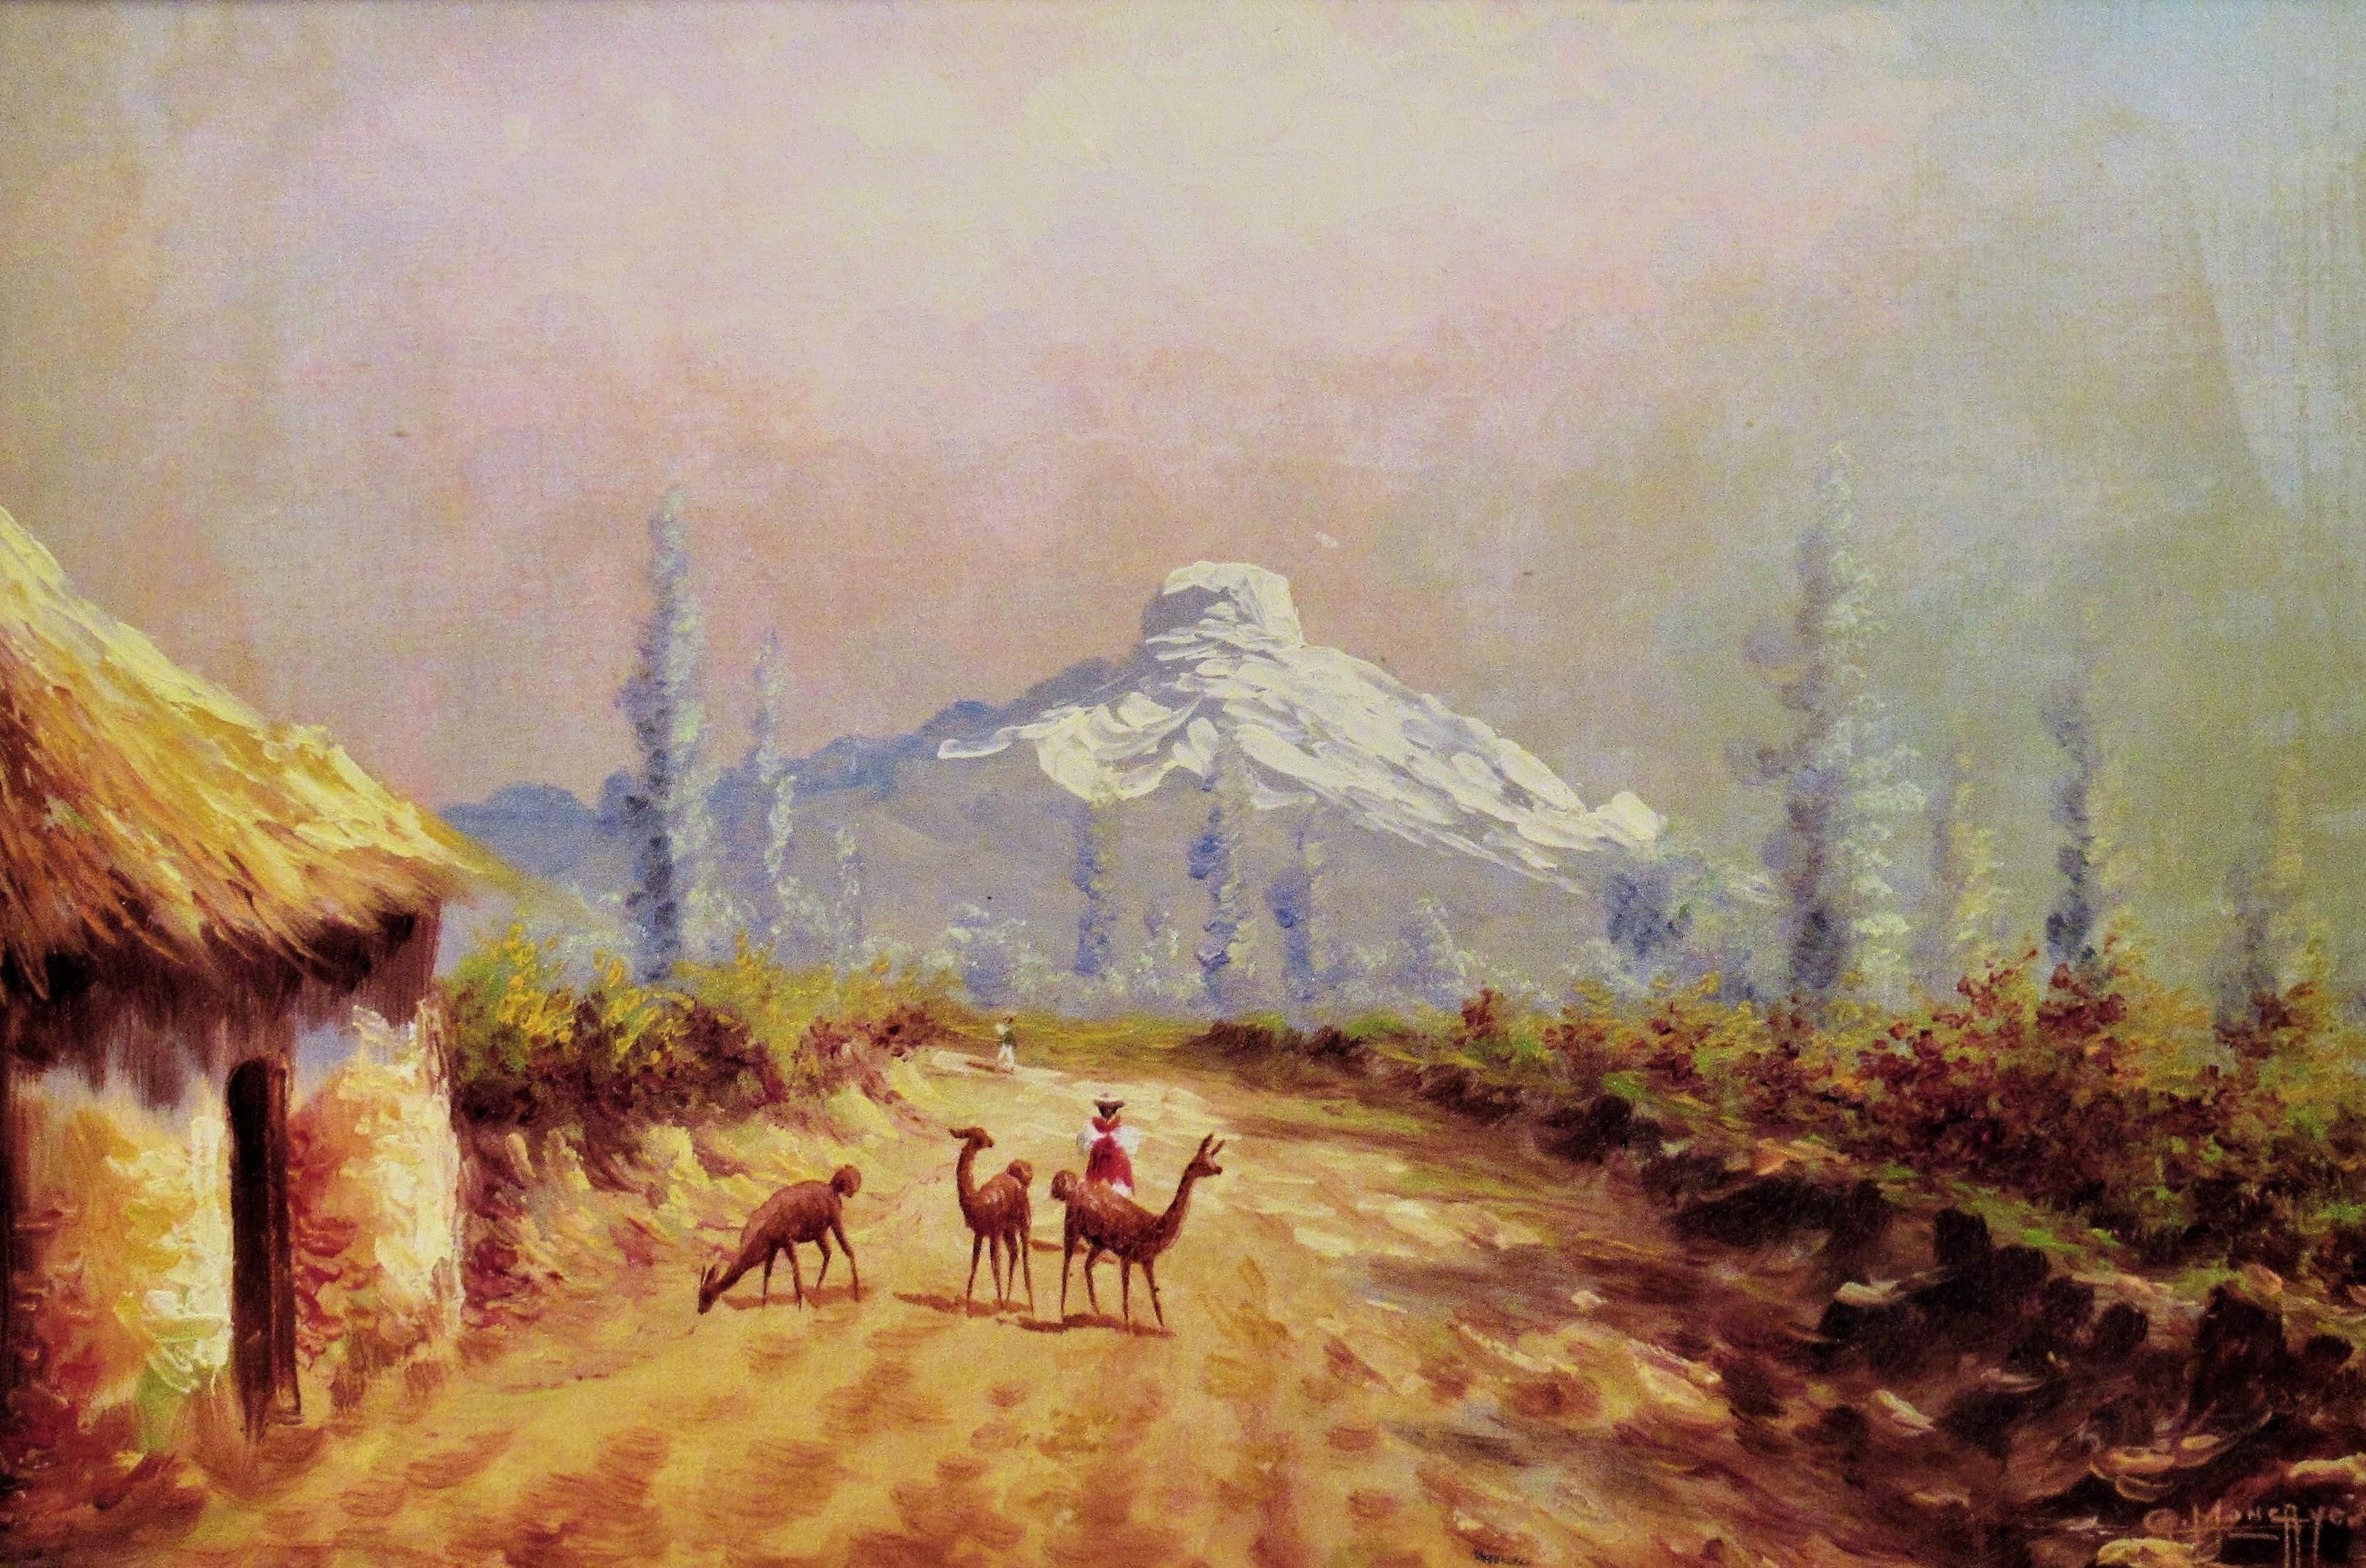 Landscape with Llamas - Painting by Gustavo Moncayo